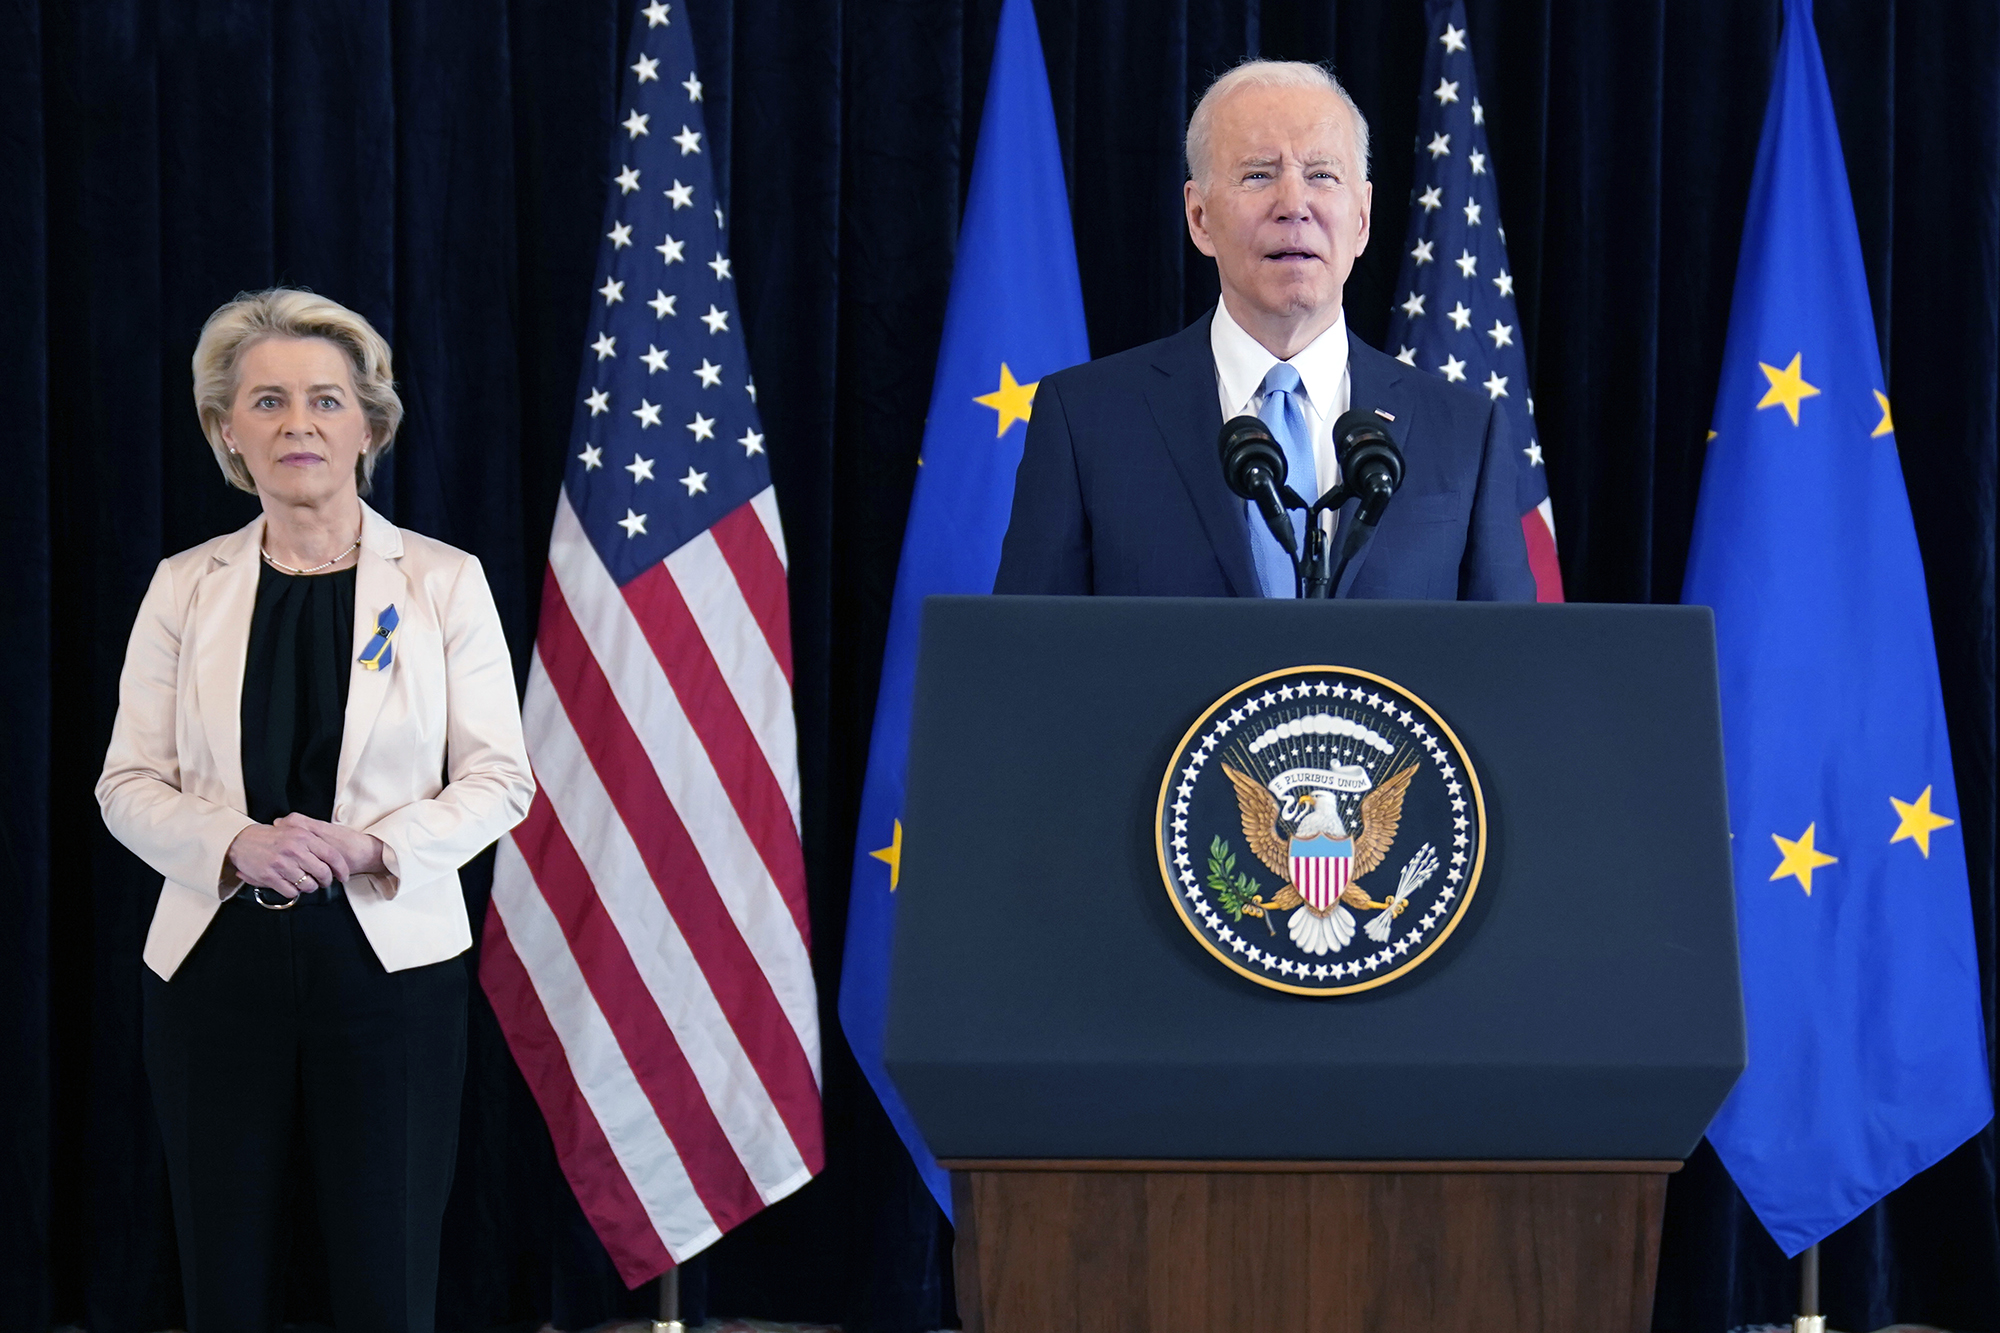 President Joe Biden and European Commission President Ursula von der Leyen talk to the press about the Russian invasion of Ukraine, at the U.S. Mission in Brussels, Belgium, on March 25.